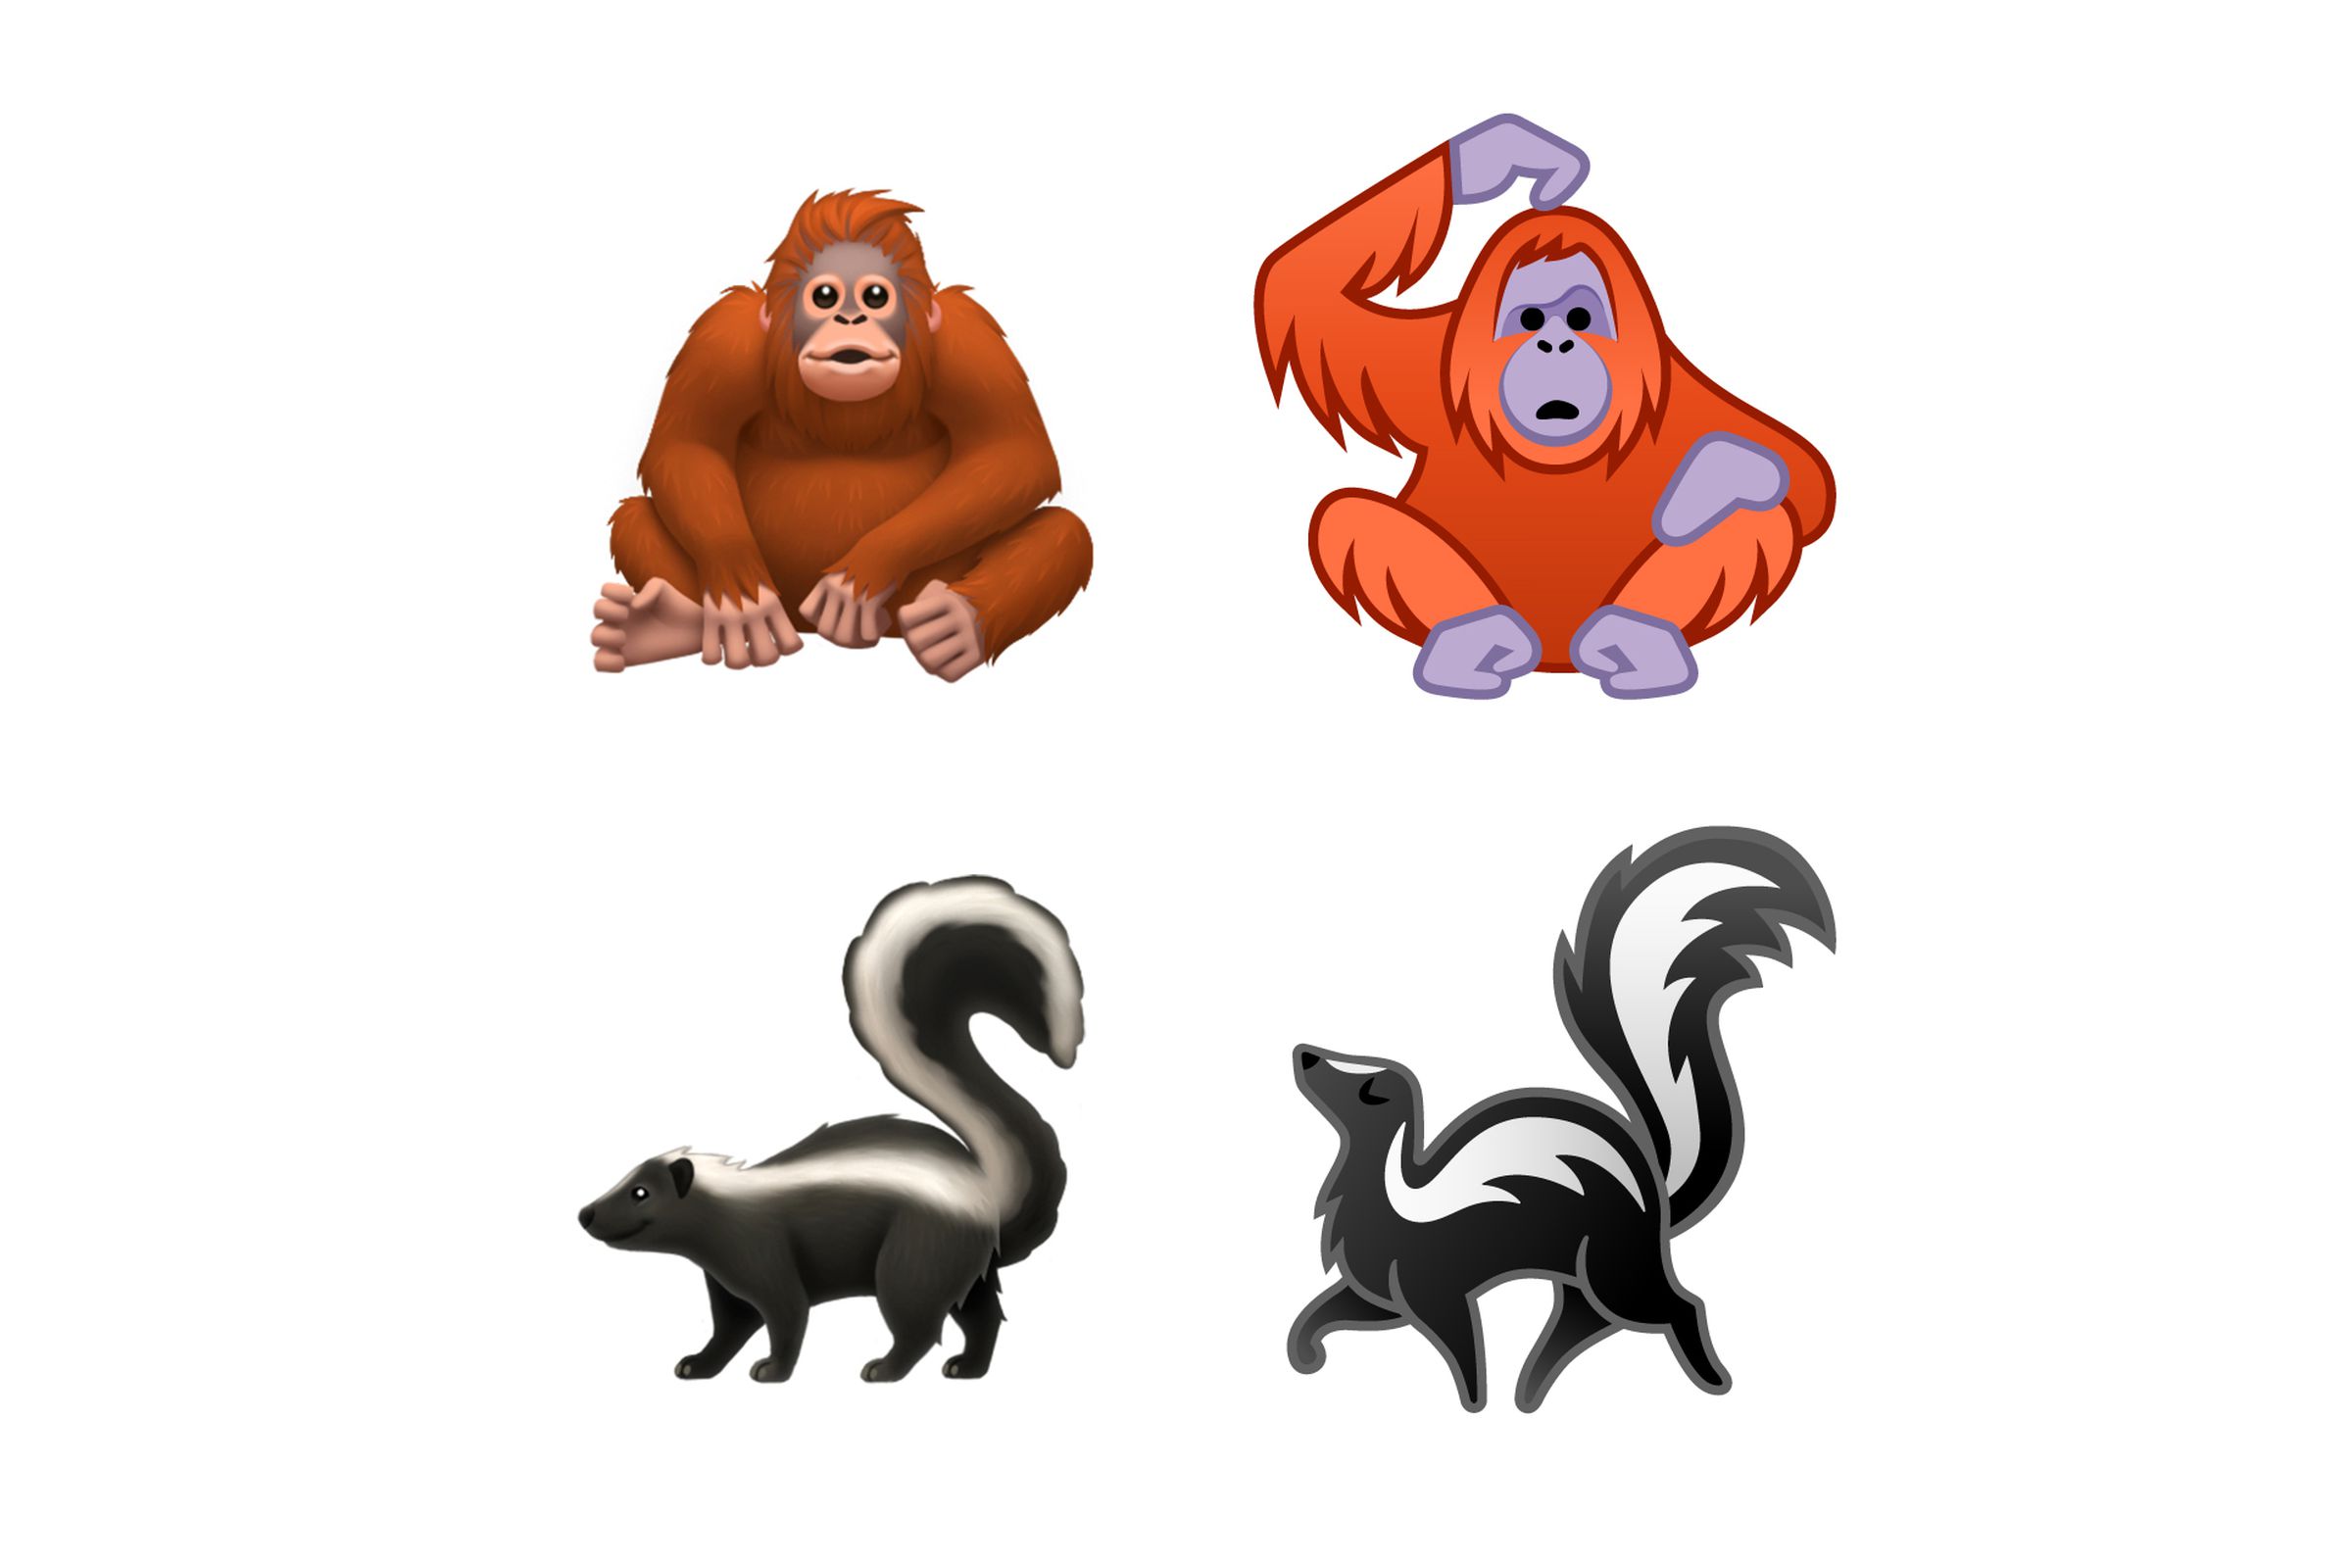 Apple’s (left) and Google’s (right) take on the orangutan and skunk have different vibes to them. 